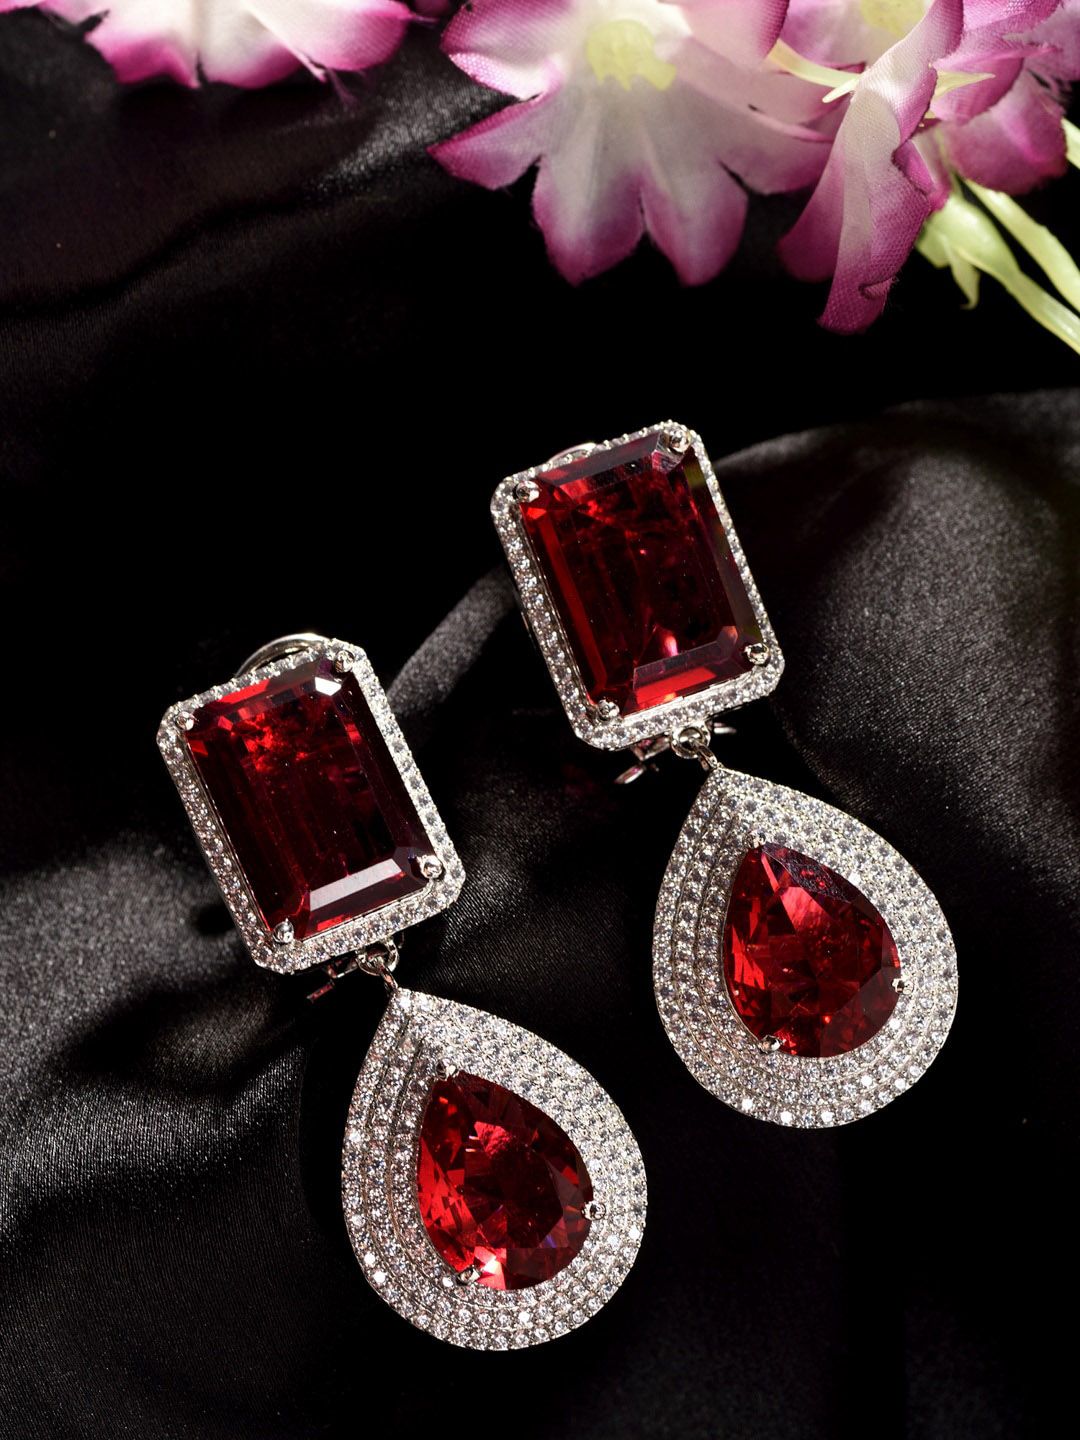 Saraf RS Jewellery Magenta & Silver-Plated Teardrop Shaped Drop Earrings Price in India